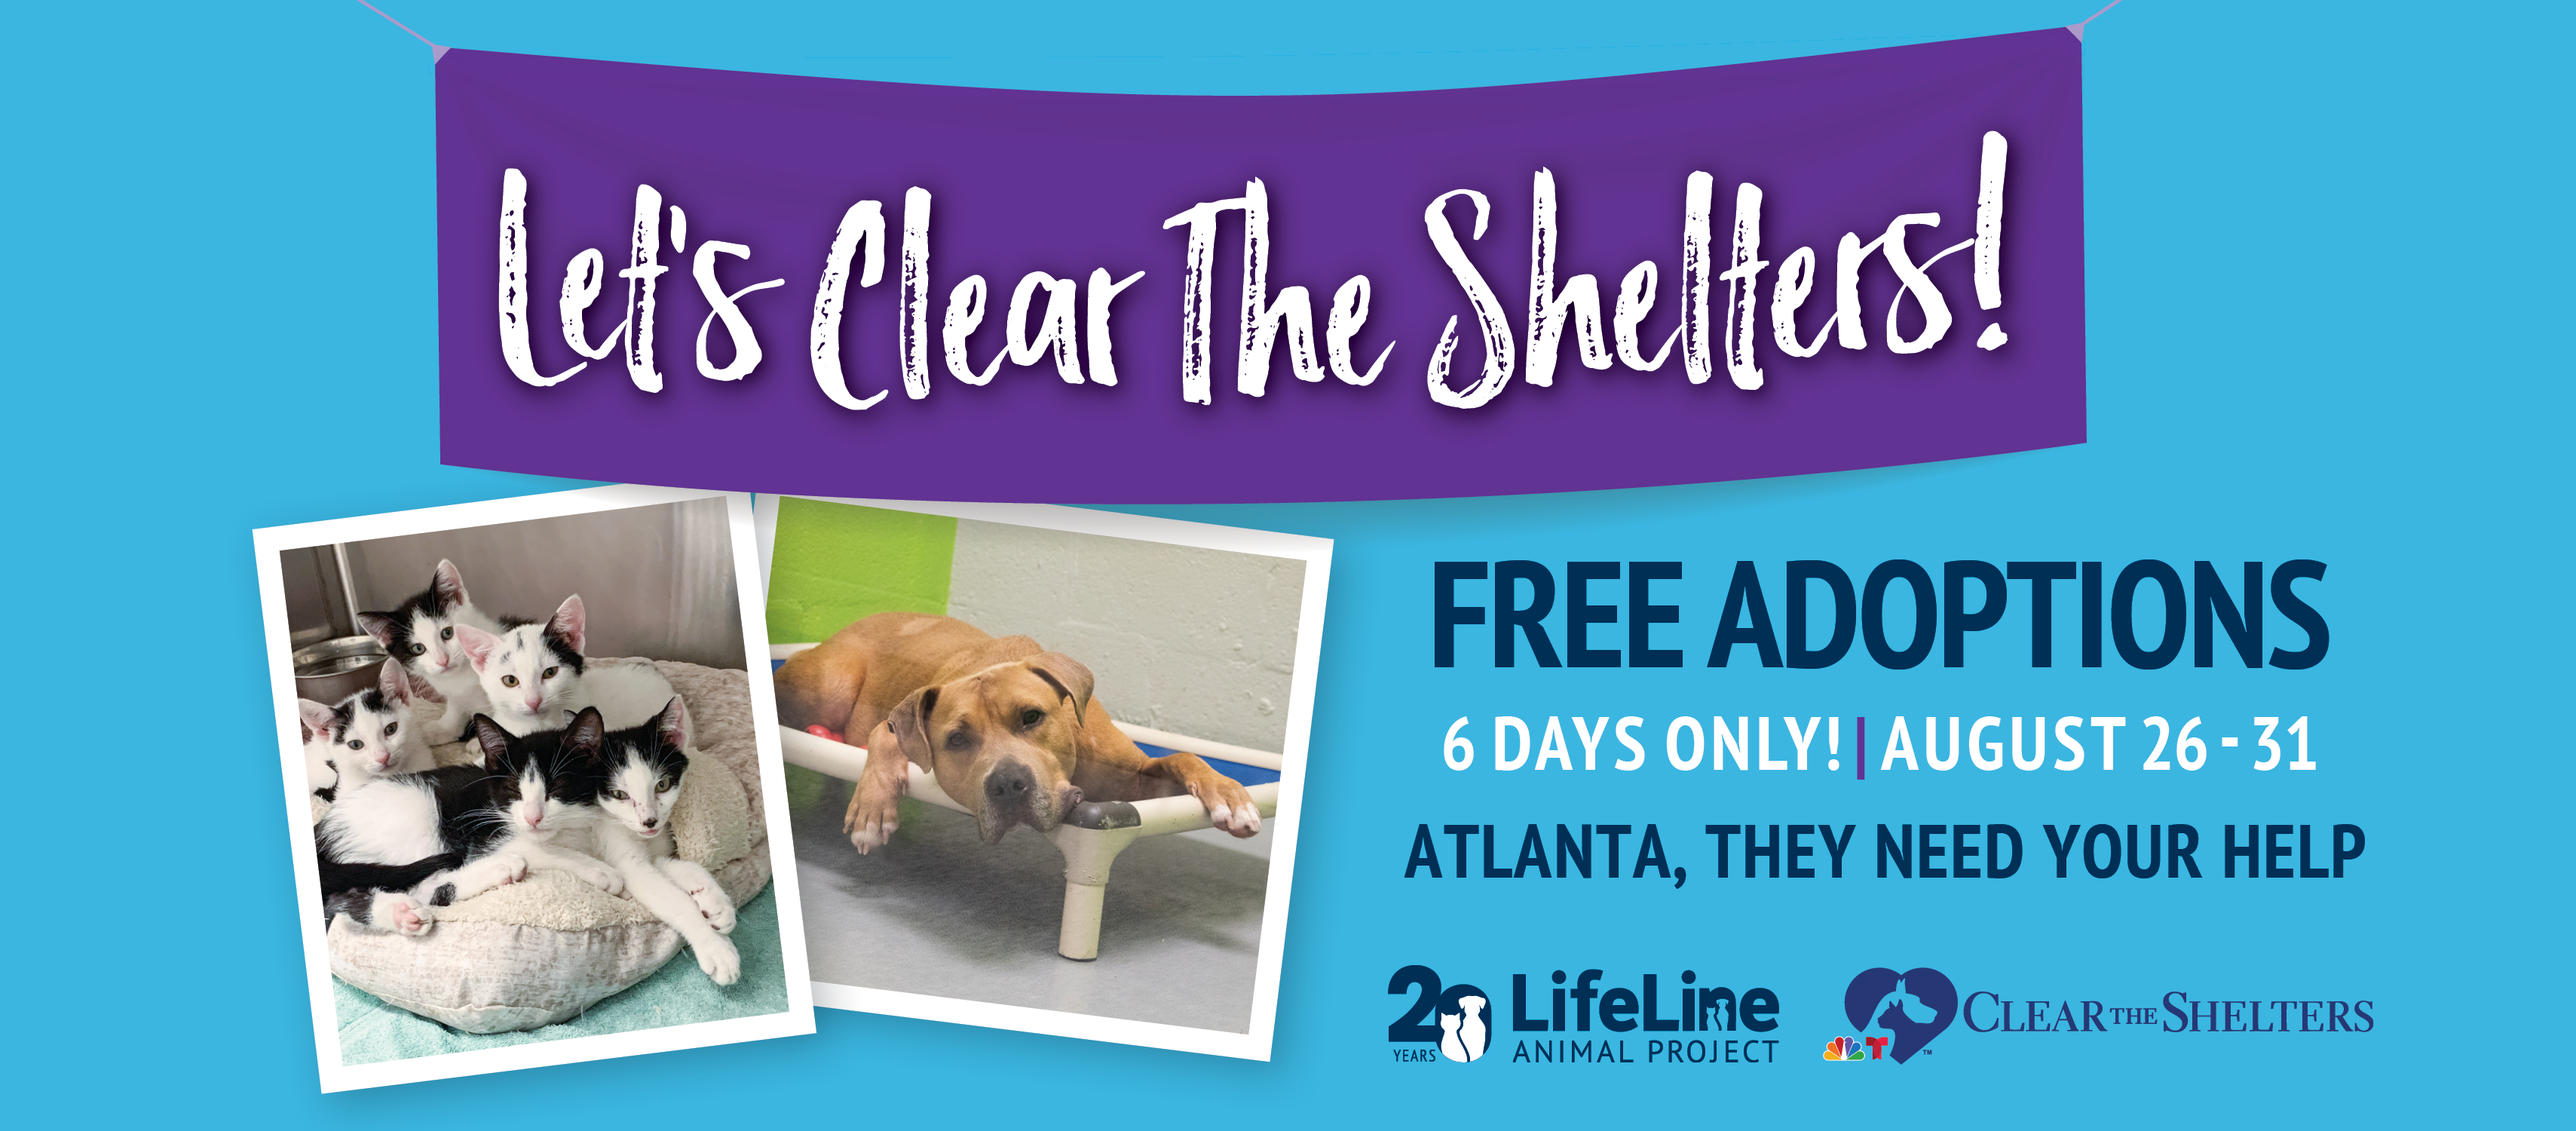 Let’s Clear The Shelters! It's FREE. The Aha! Connection